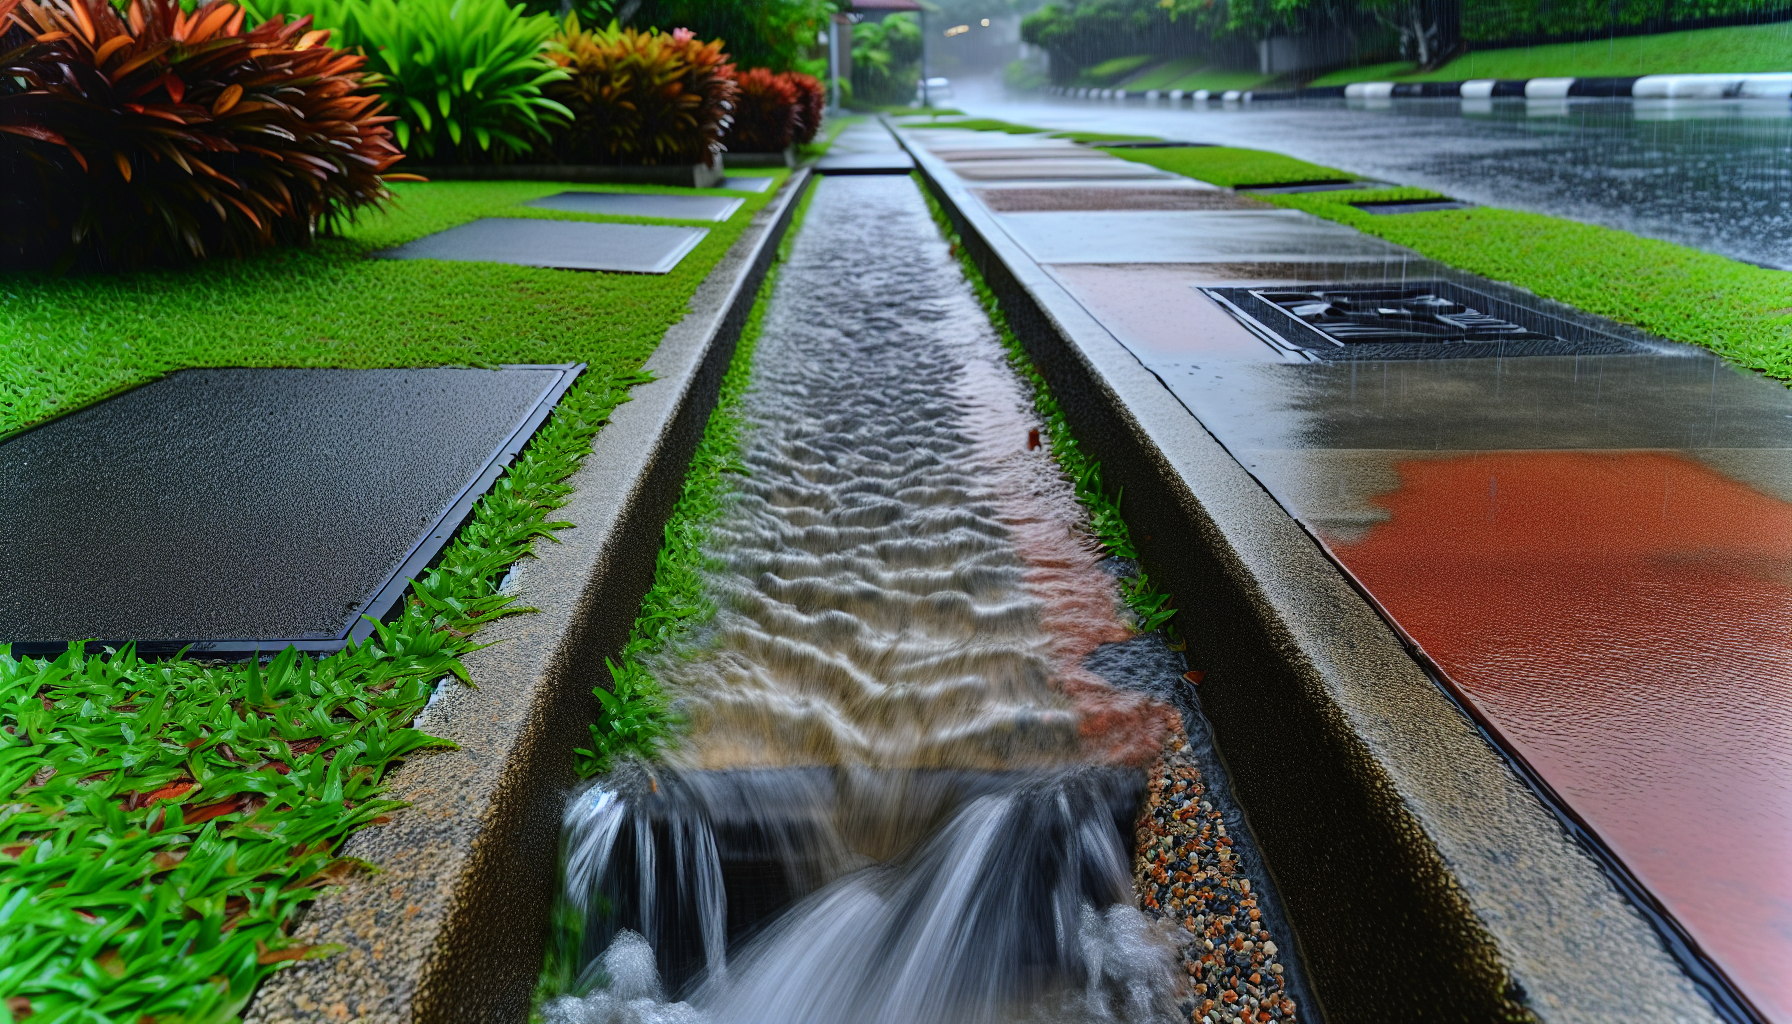 Photo of rainwater flowing into a stormwater drain